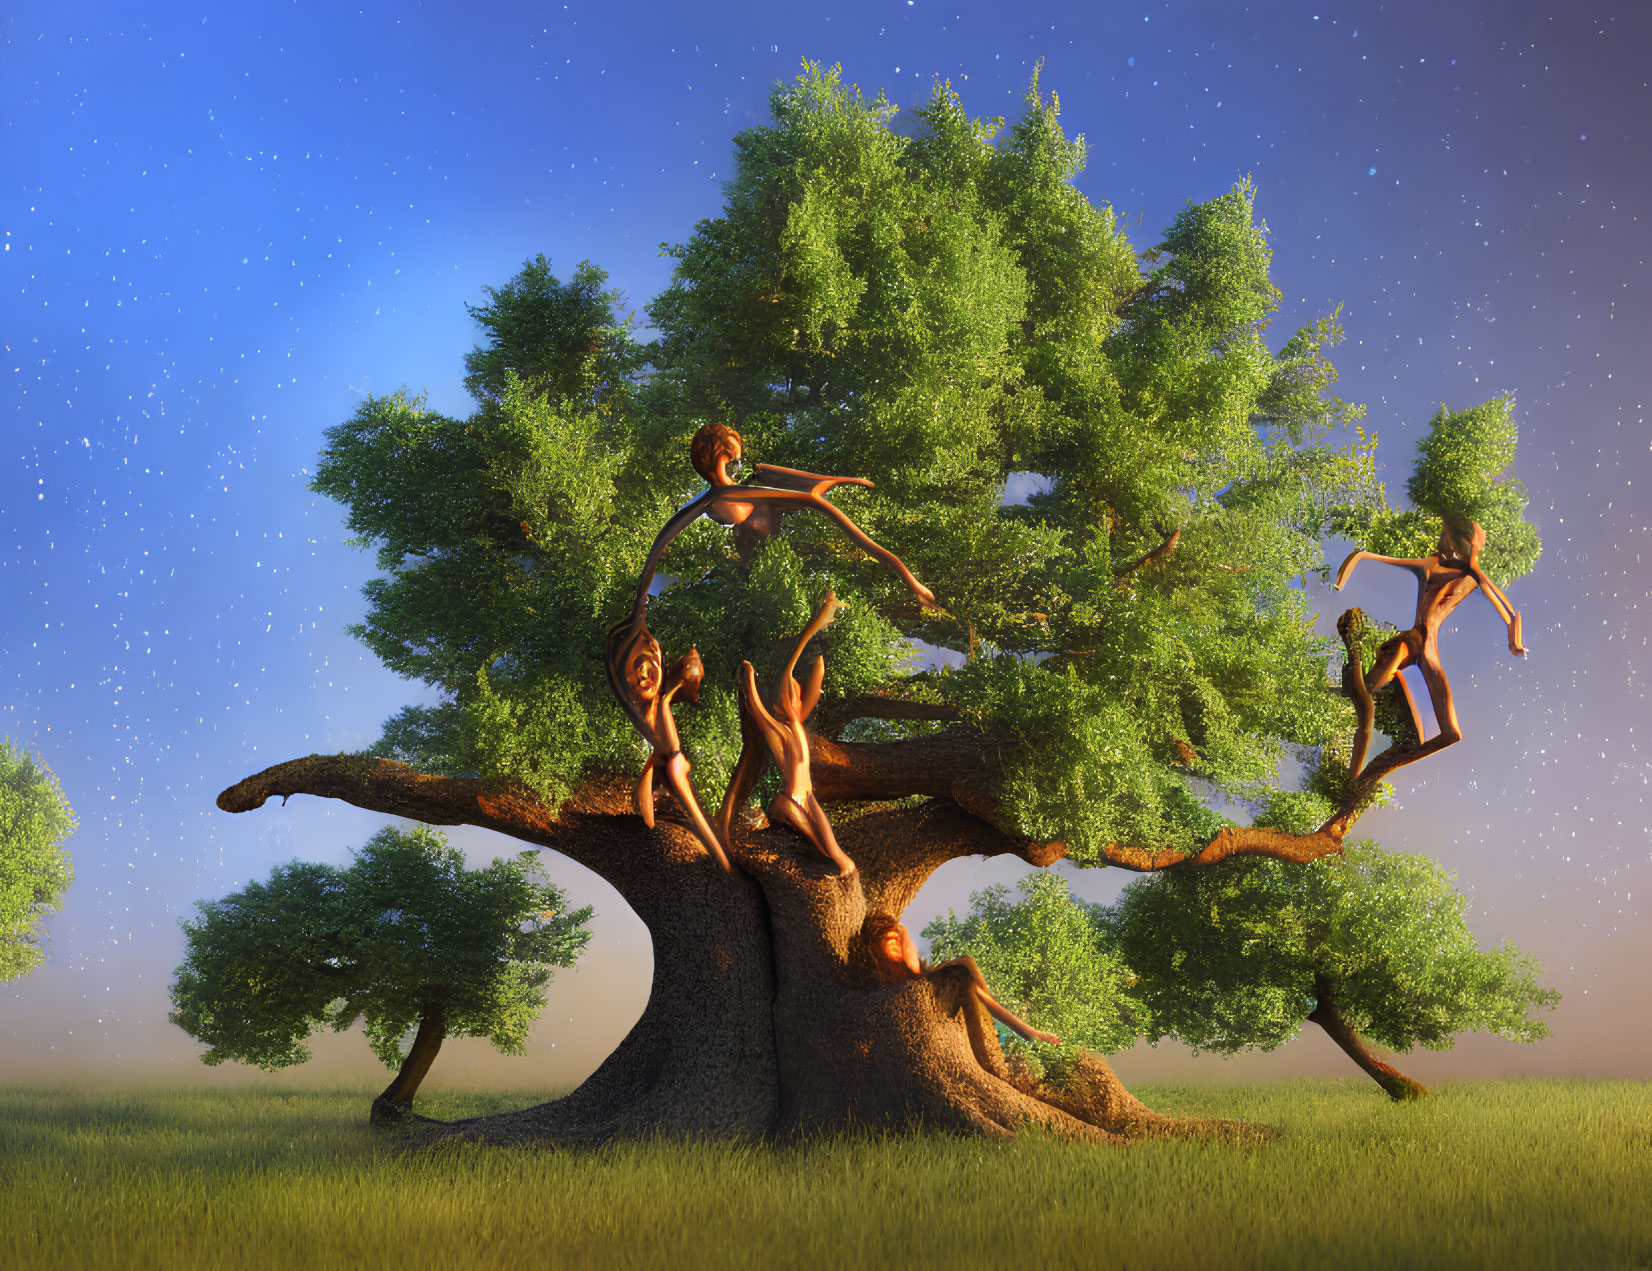 Majestic tree with human-like figures in serene landscape